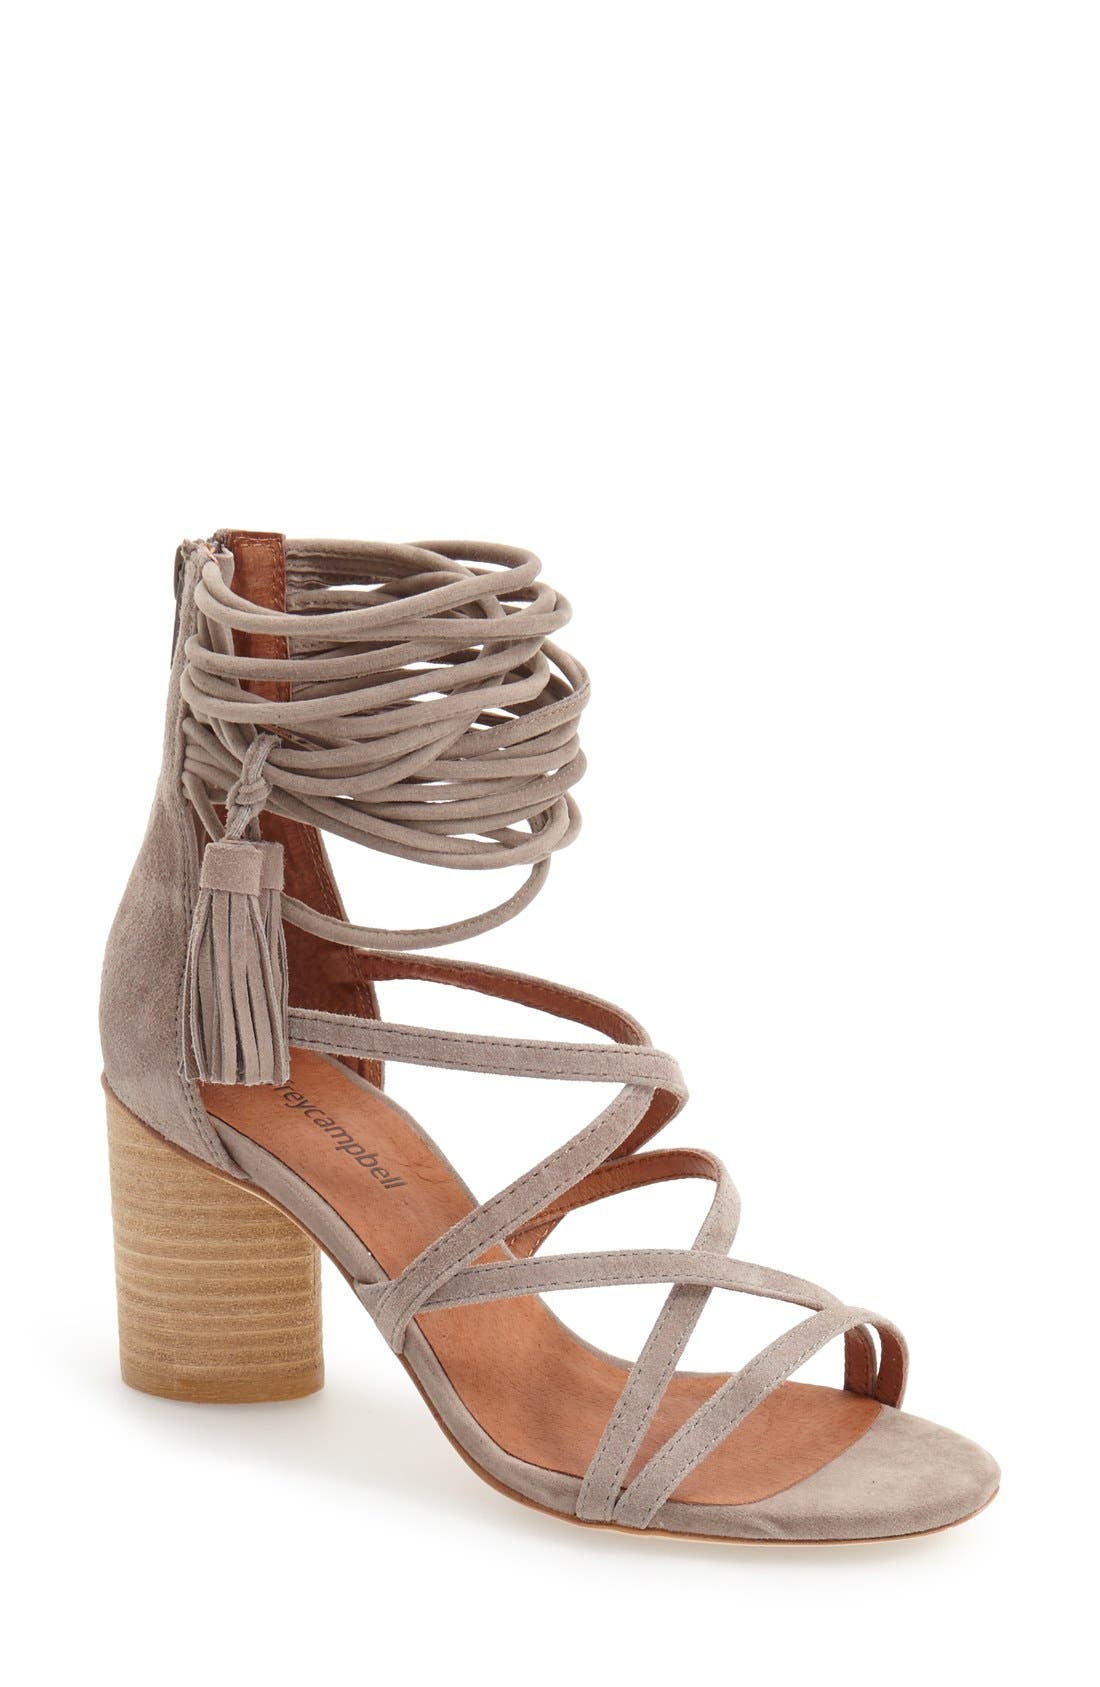 Jeffrey Campbell 'Despina' Strappy 